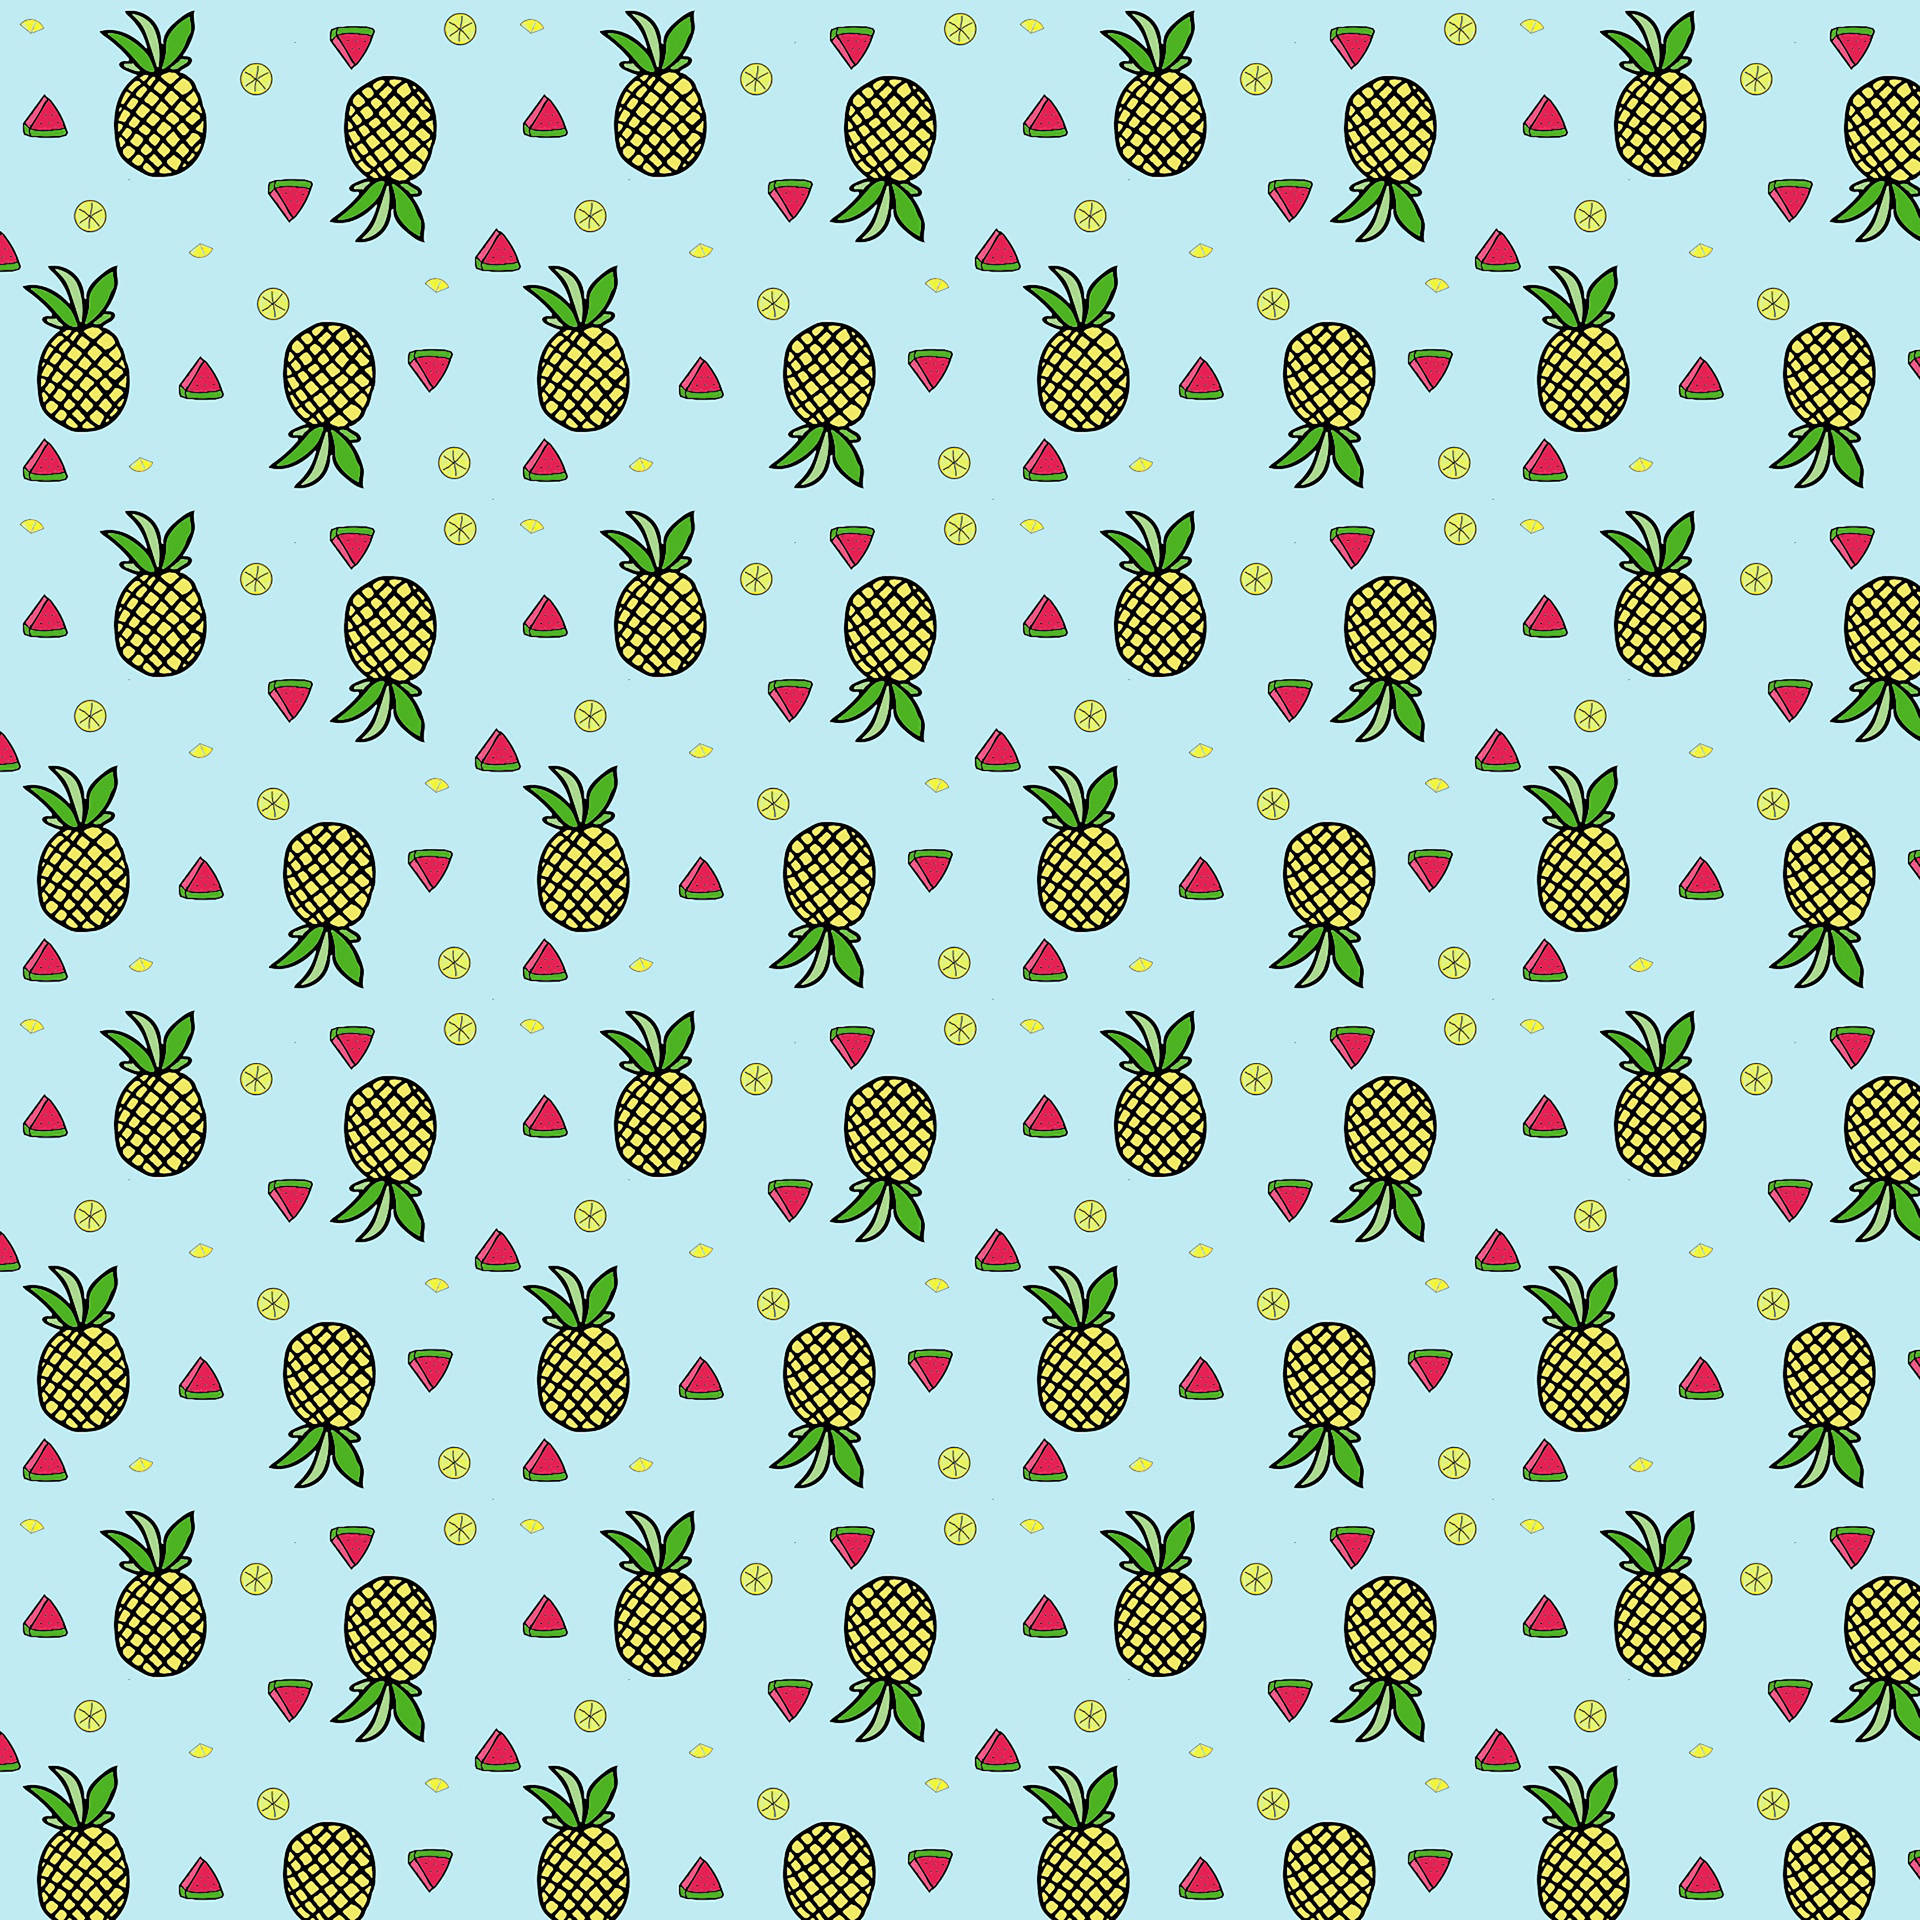 Pineapple 3000X3000 Wallpaper and Background Image